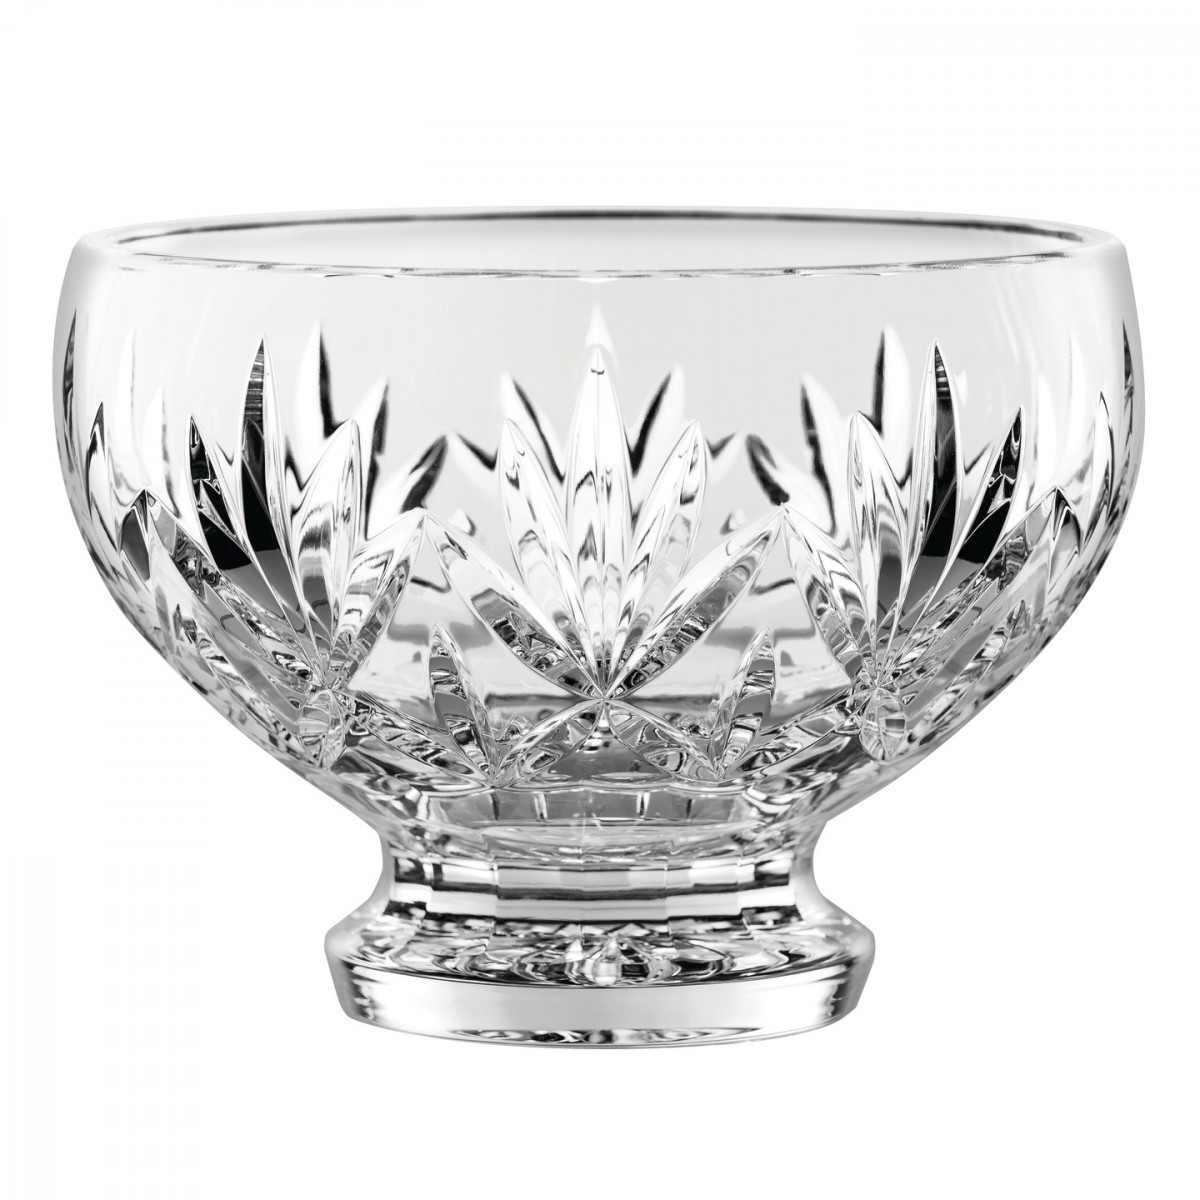 marquis by waterford shelton vase 12 of caprice 10in footed bowl marquis by waterford us throughout caprice 10in footed bowl